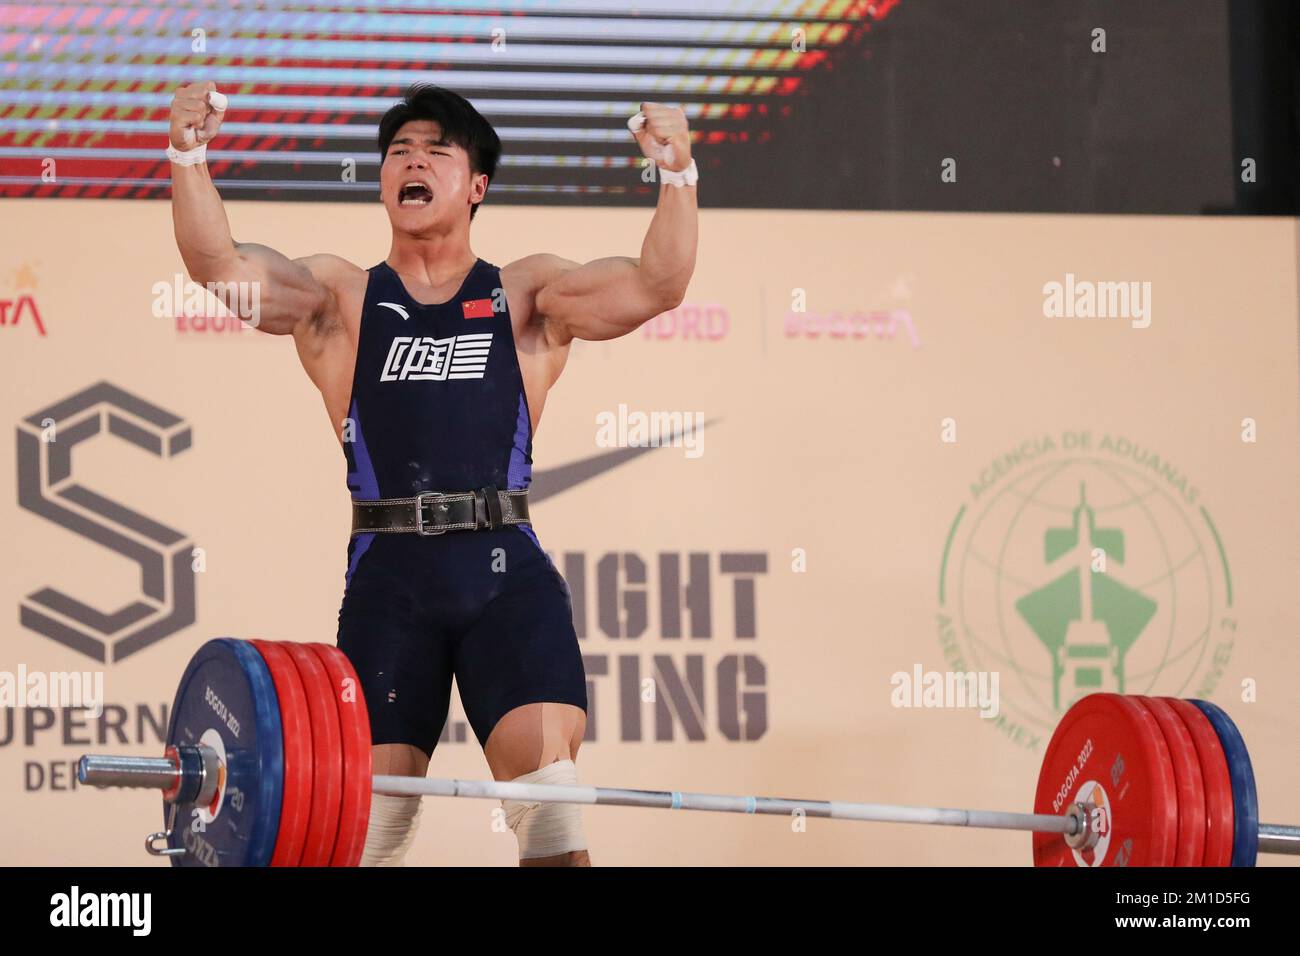 Bogota, Colombia. 11th Dec, 2022. Liu Huanhua of China celebrates during the mens 89kg clean and jerk event at the 2022 World Weightlifting Championships in Bogota, Colombia, Dec